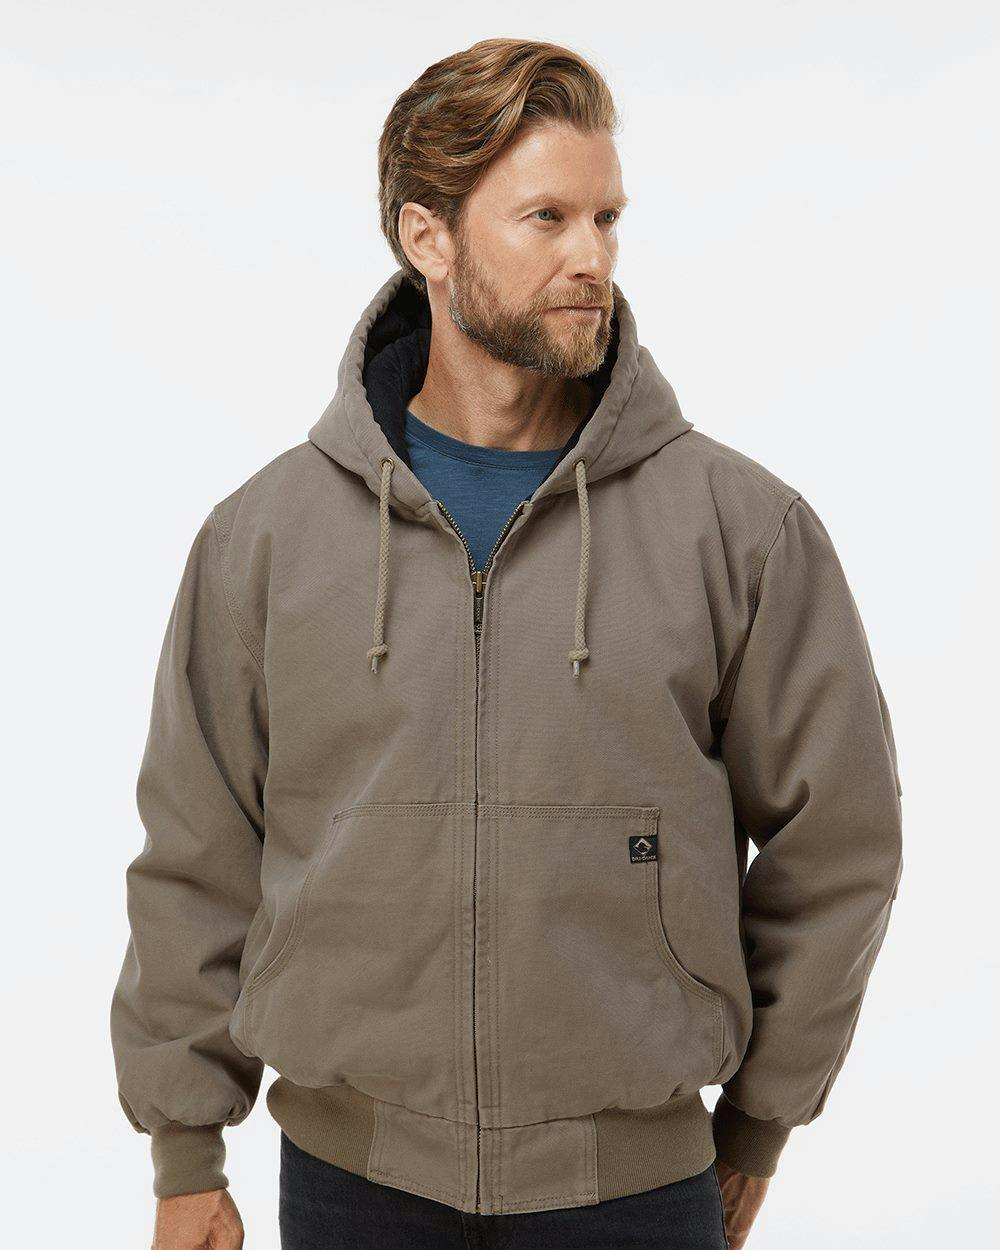 Image for Cheyenne Boulder Cloth™ Hooded Jacket with Tricot Quilt Lining Tall Sizes - 5020T